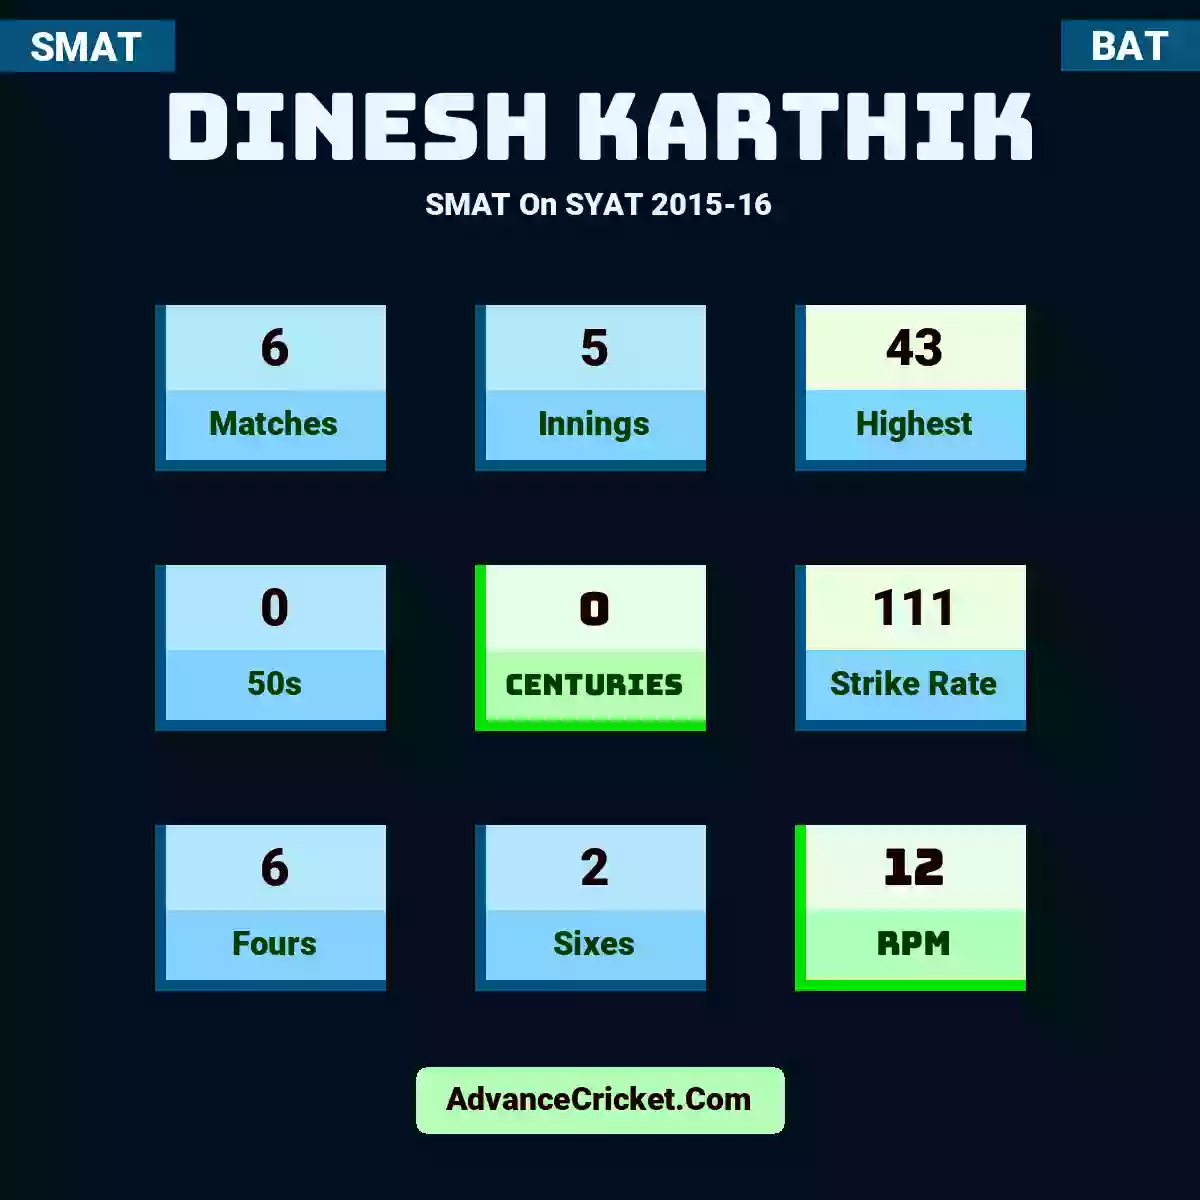 Dinesh Karthik SMAT  On SYAT 2015-16, Dinesh Karthik played 6 matches, scored 43 runs as highest, 0 half-centuries, and 0 centuries, with a strike rate of 111. D.Karthik hit 6 fours and 2 sixes, with an RPM of 12.